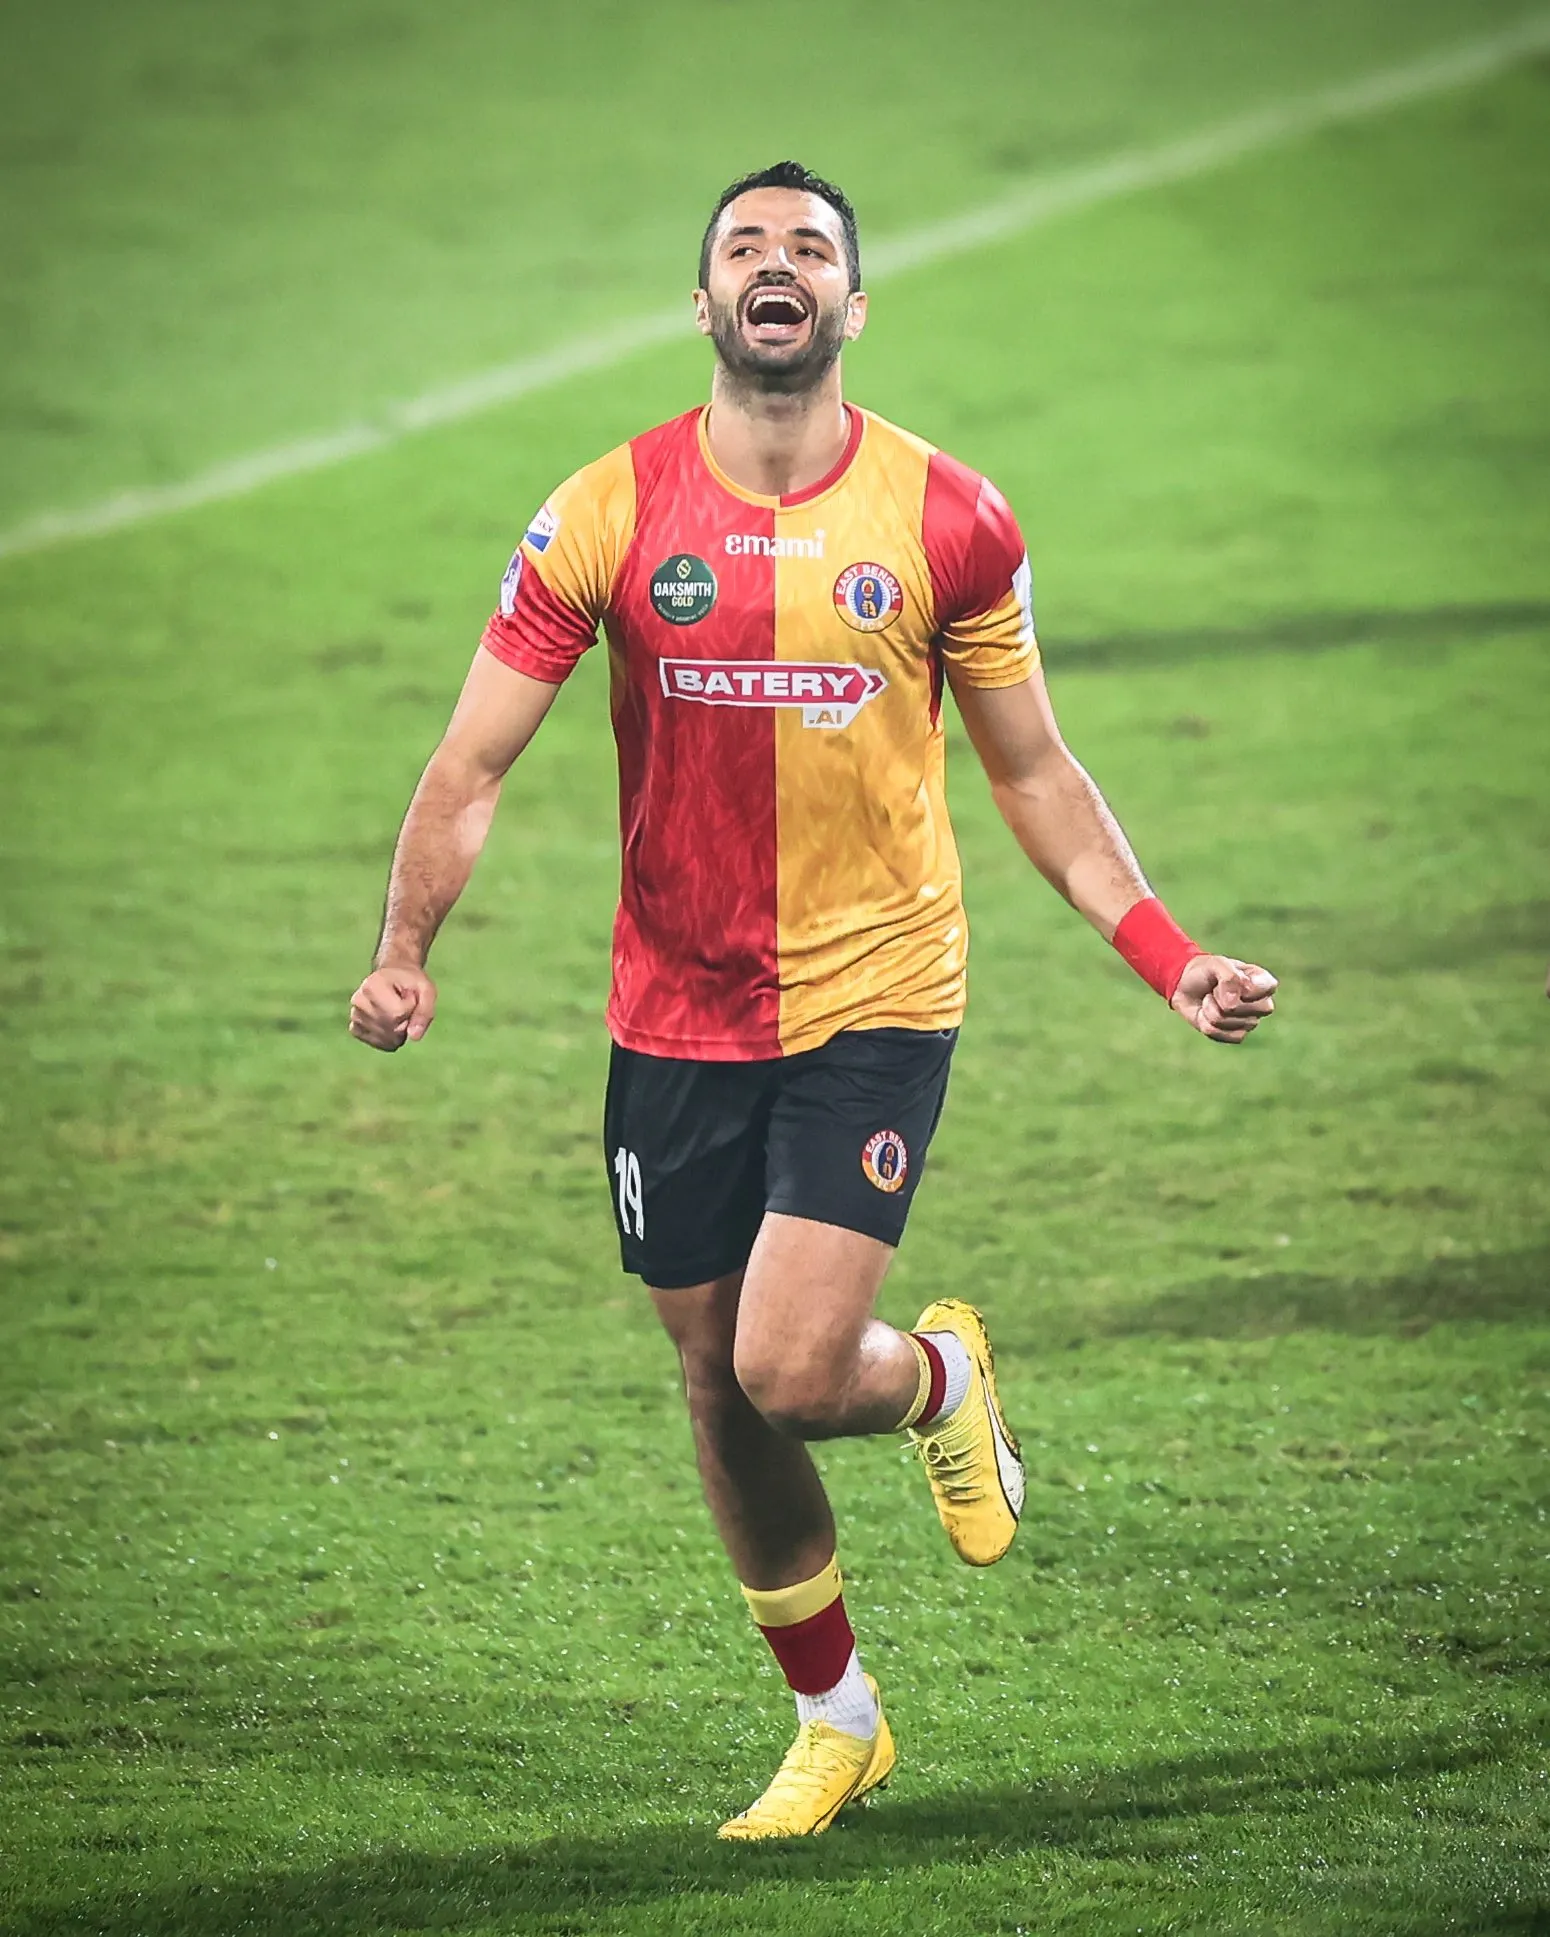 Hijazi Maher after scoring the first goal in the Kalinga Super Cup semi-final between East Bengal and Jamshedpur FC  